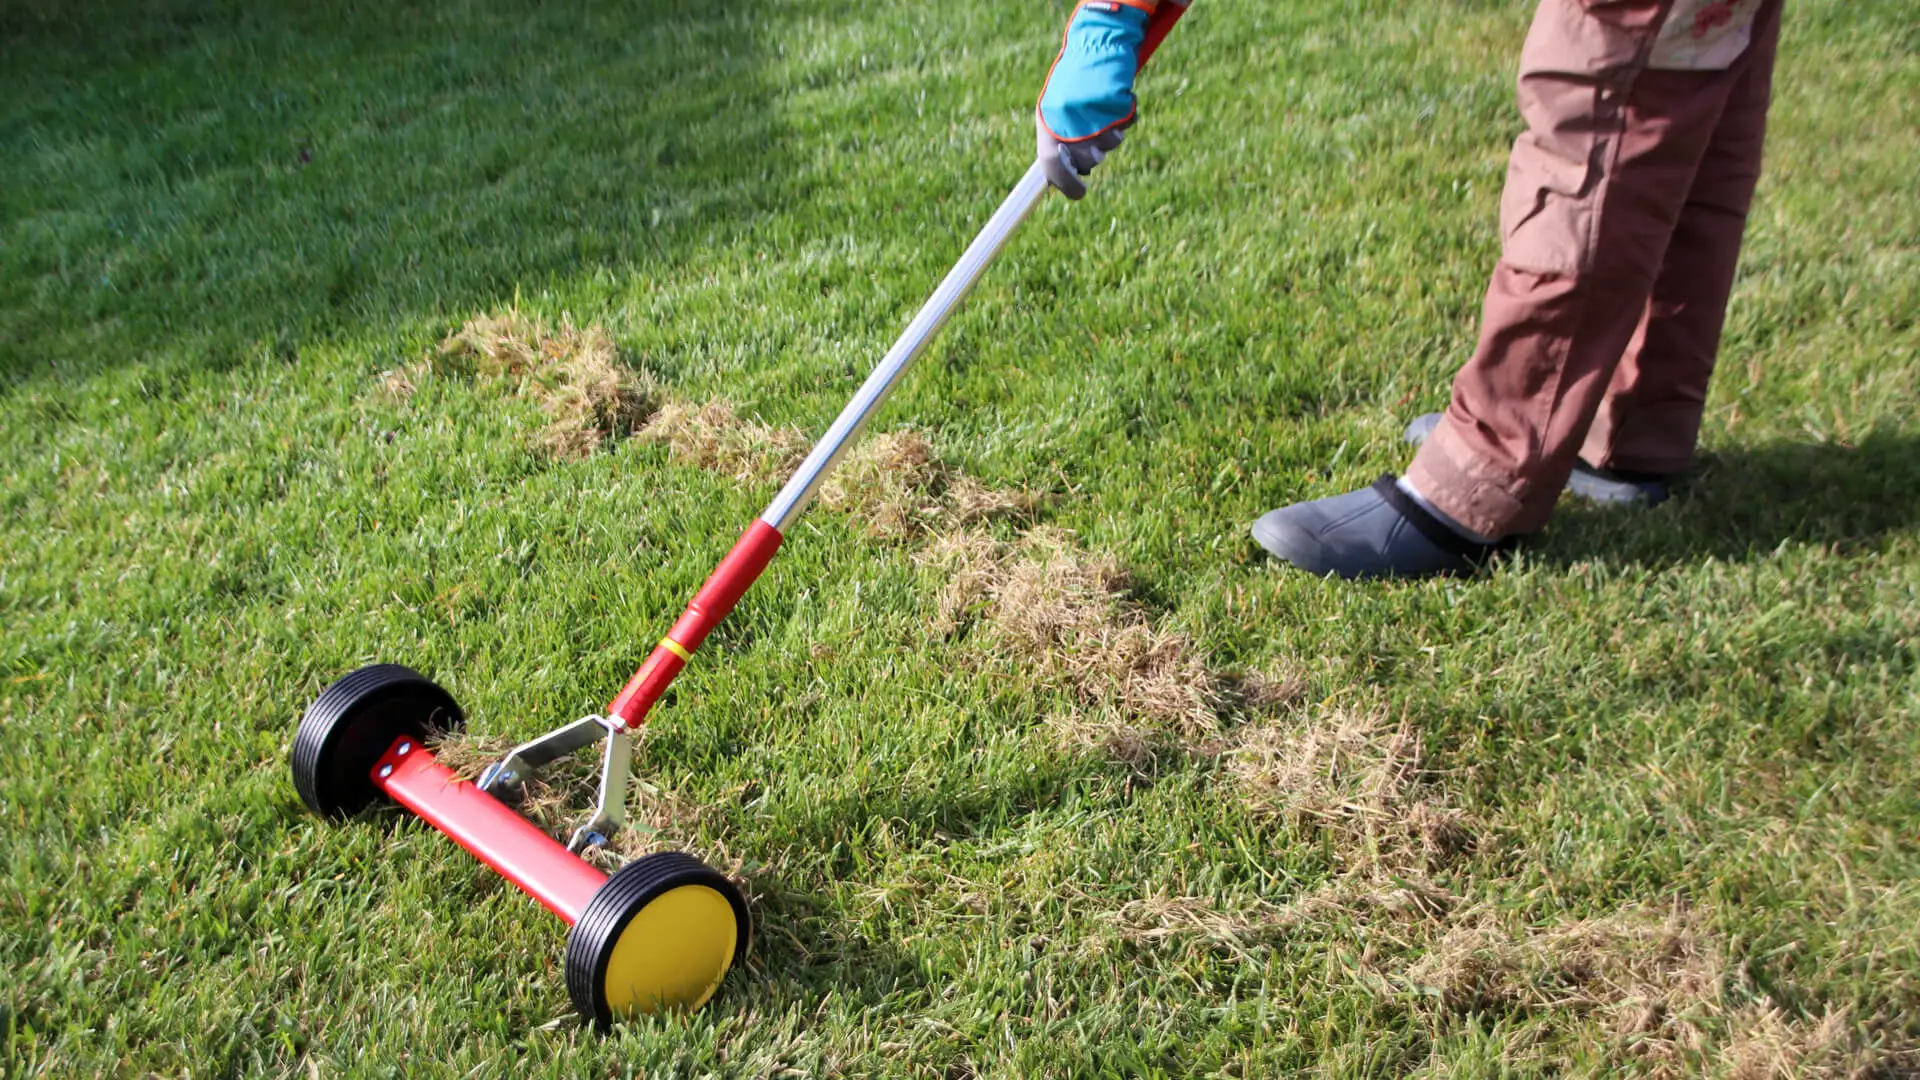 7 Basic Lawn Maintenance Allen, TX Principles to Employ to Have the Best Lawn in Town